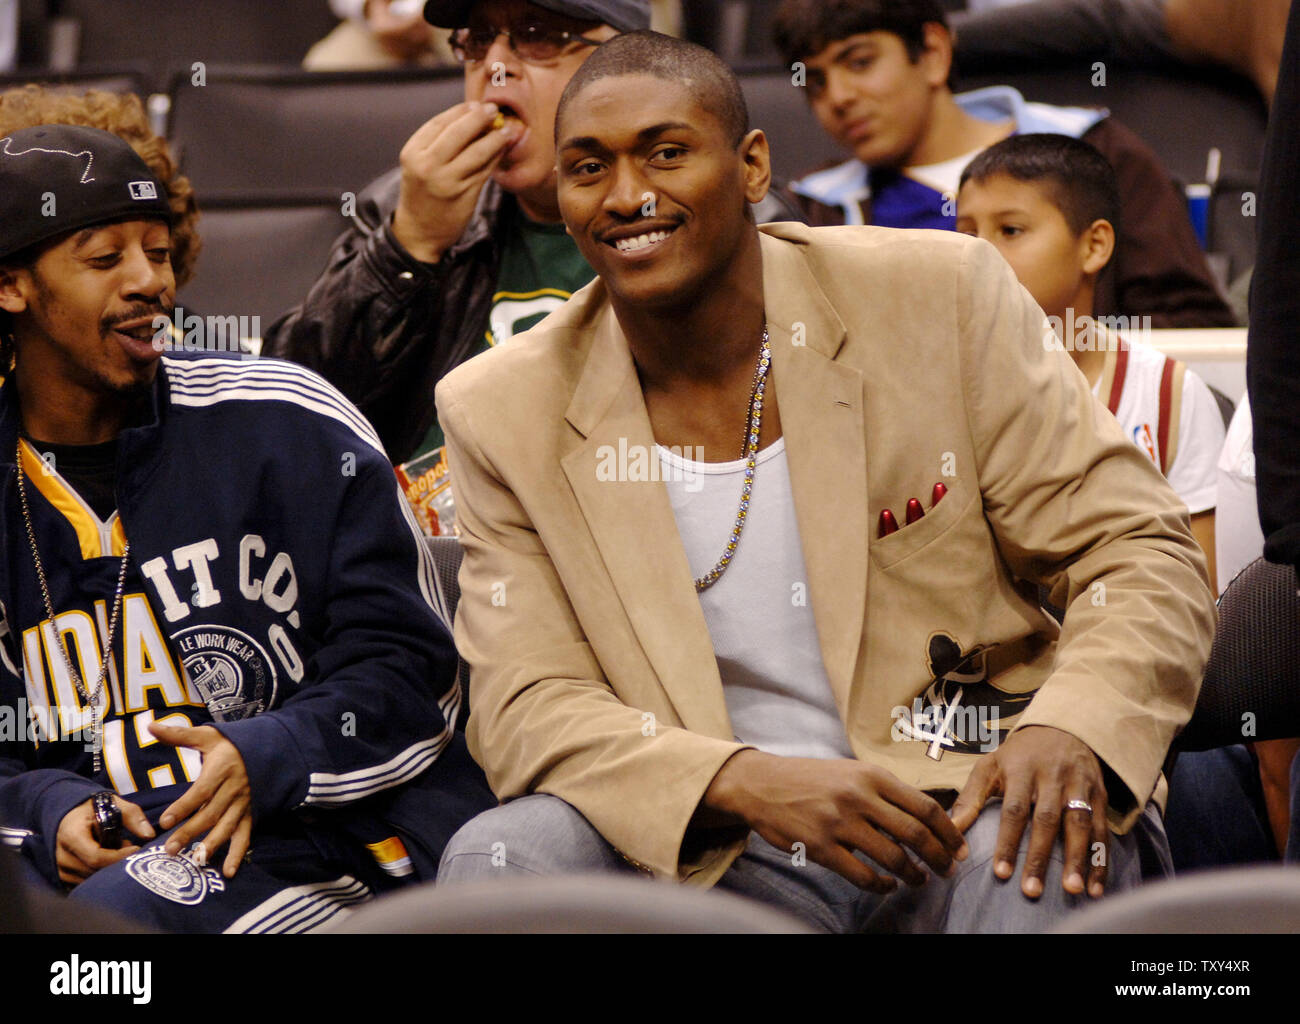 Indiana Pacers Ron Artest (R) watches the NBA game between the Cleveland Cavaliers and the Los Angeles Lakers in Los Angeles January 12, 2006. Artest asked to be traded last month, and although he withdrew the statement, team president Larry Bird said he is no longer interested in having Artest play for the team. Artest hasn't played in a game since December 6, 2005. (UPI Photo/Jim Ruymen) Stock Photo